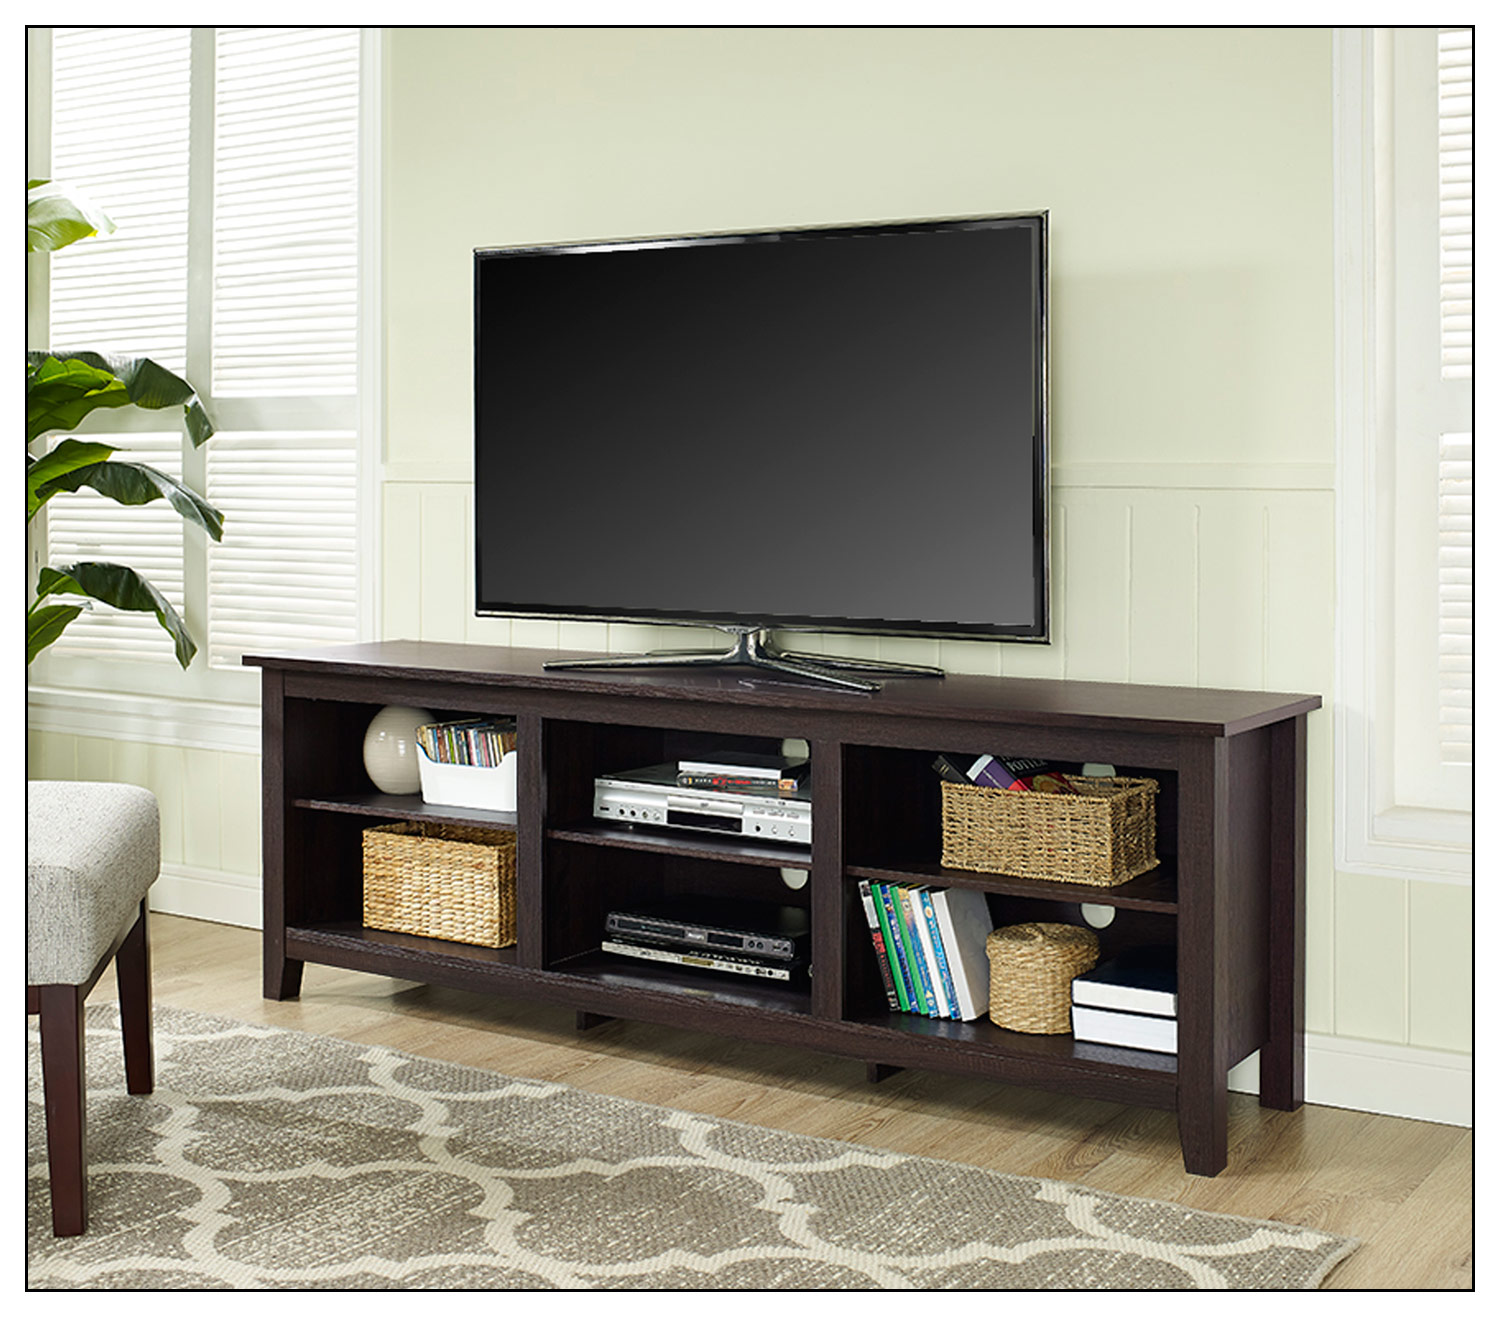 Angle View: Walker Edison - Modern 70" Open 6 Cubby Storage TV Stand for TVs up to 80" - Espresso